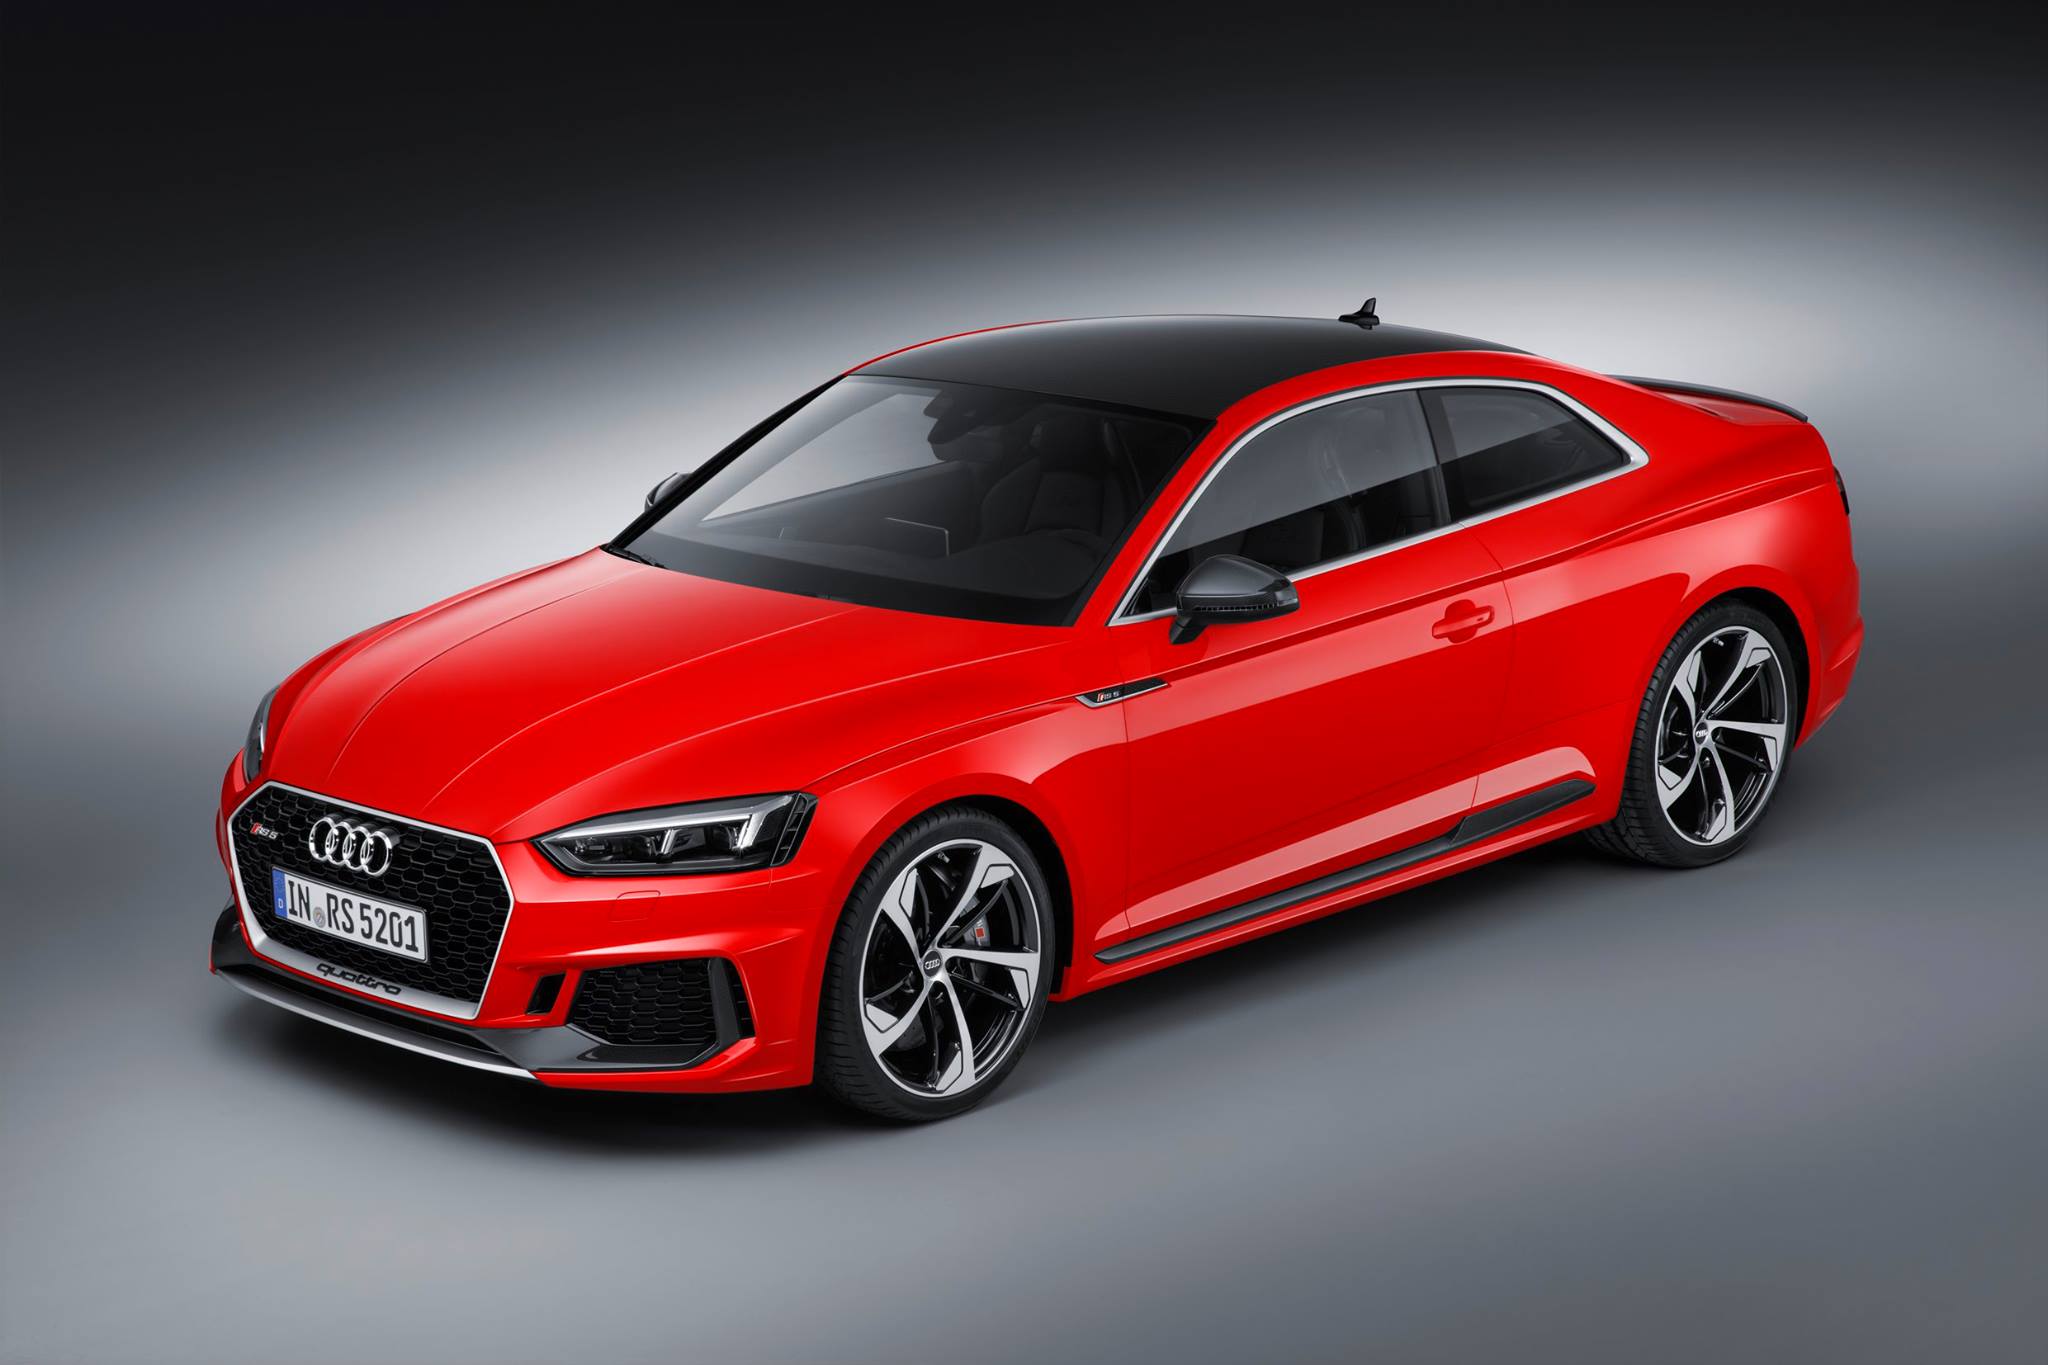 chiếc xe Audi RS5 Coupe